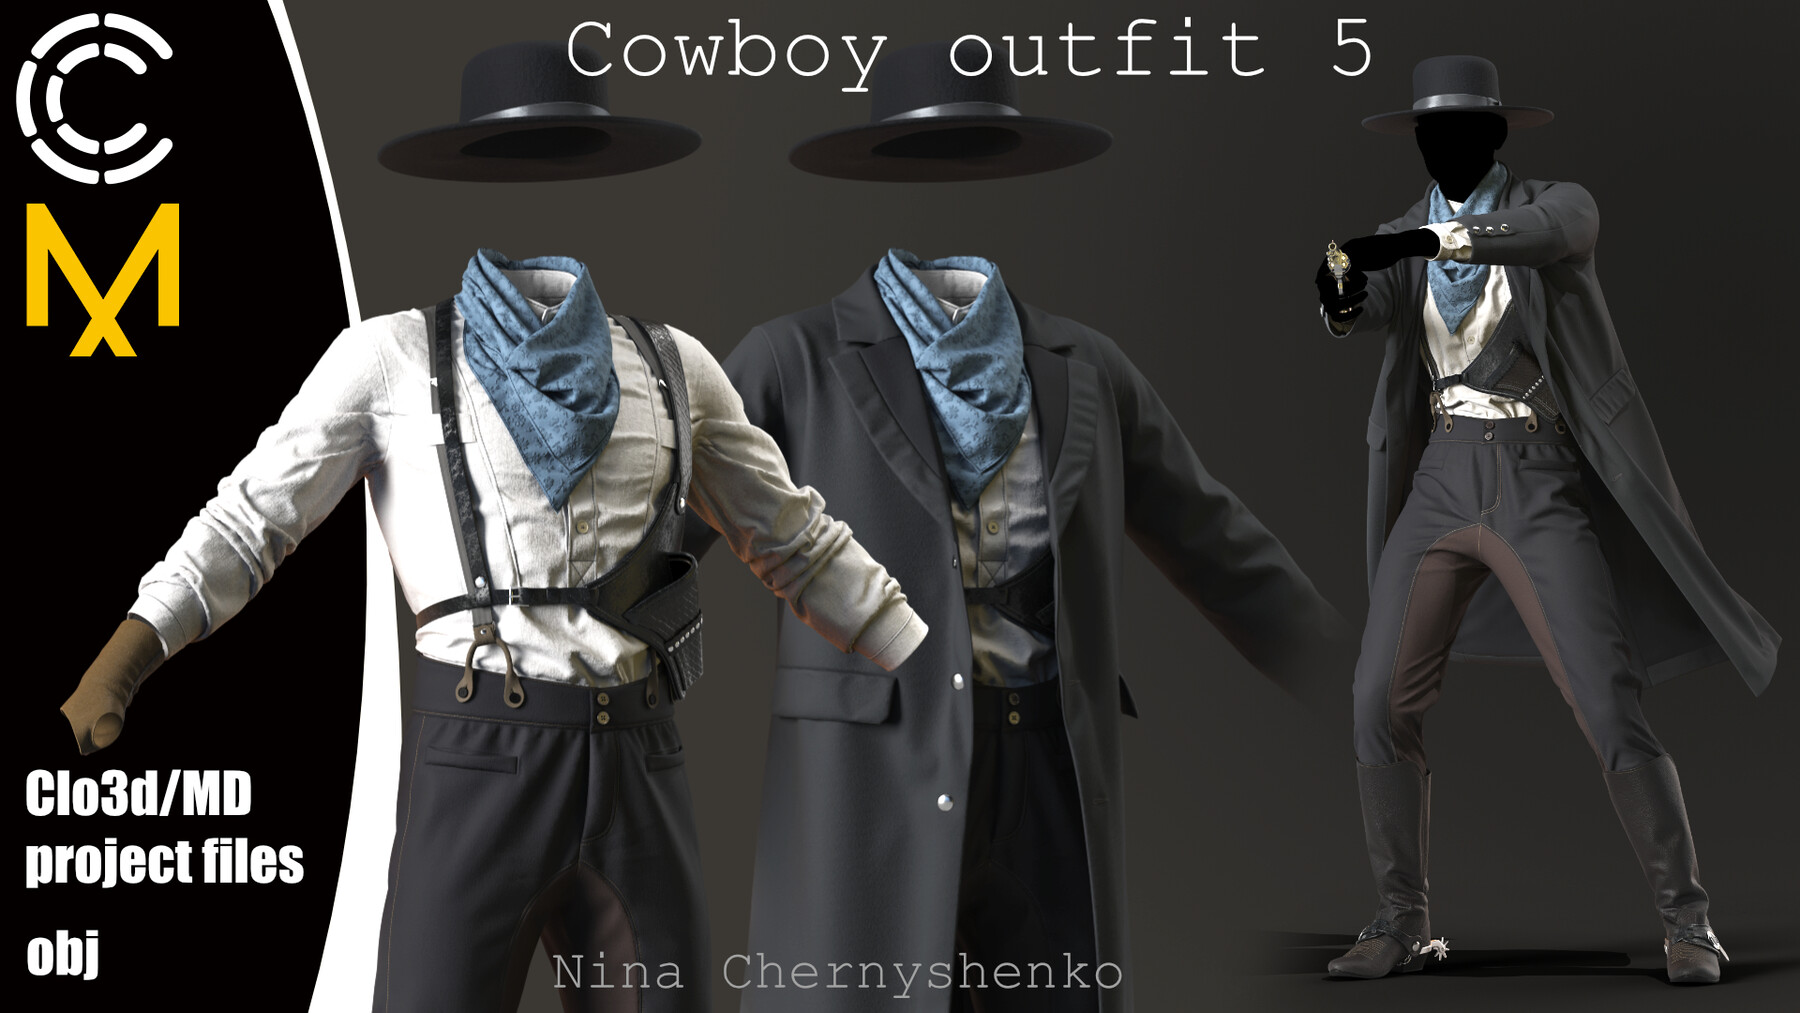 ArtStation - Cowboy outfit